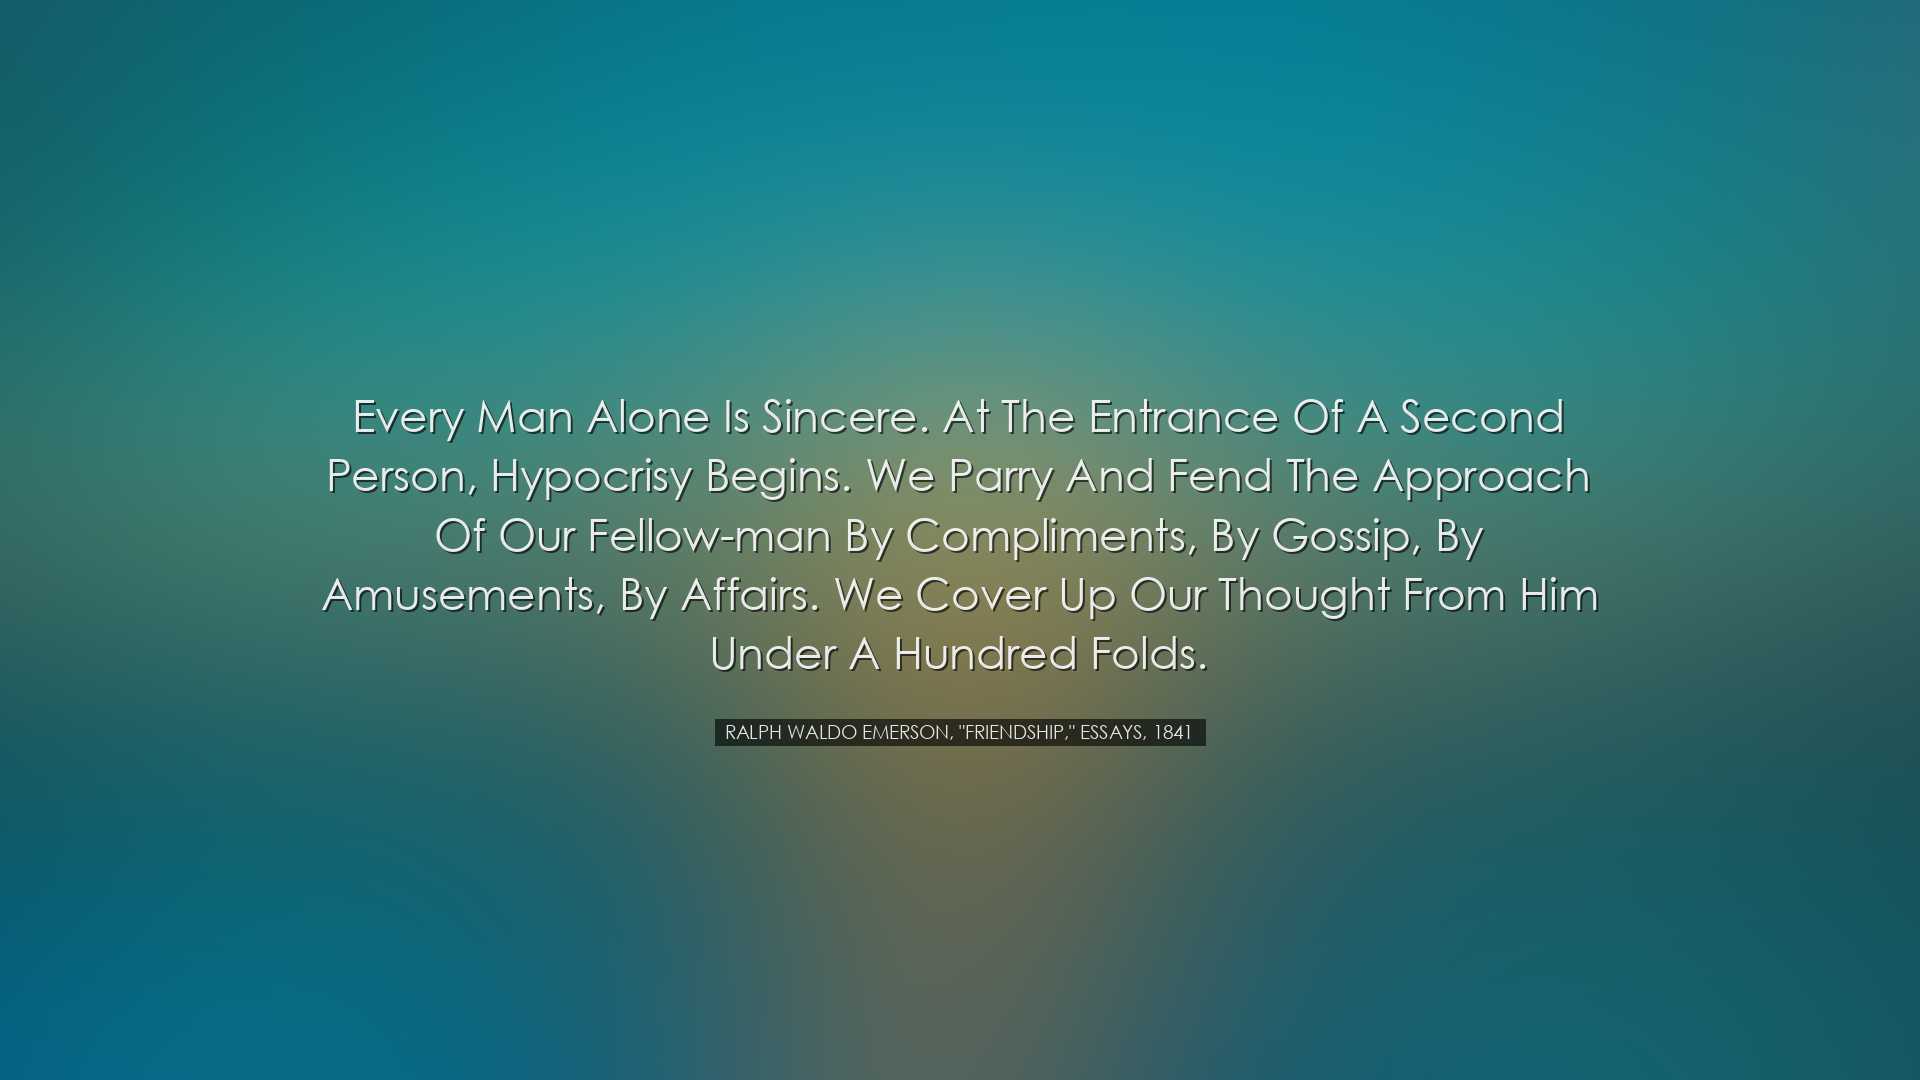 Every man alone is sincere. At the entrance of a second person, hy